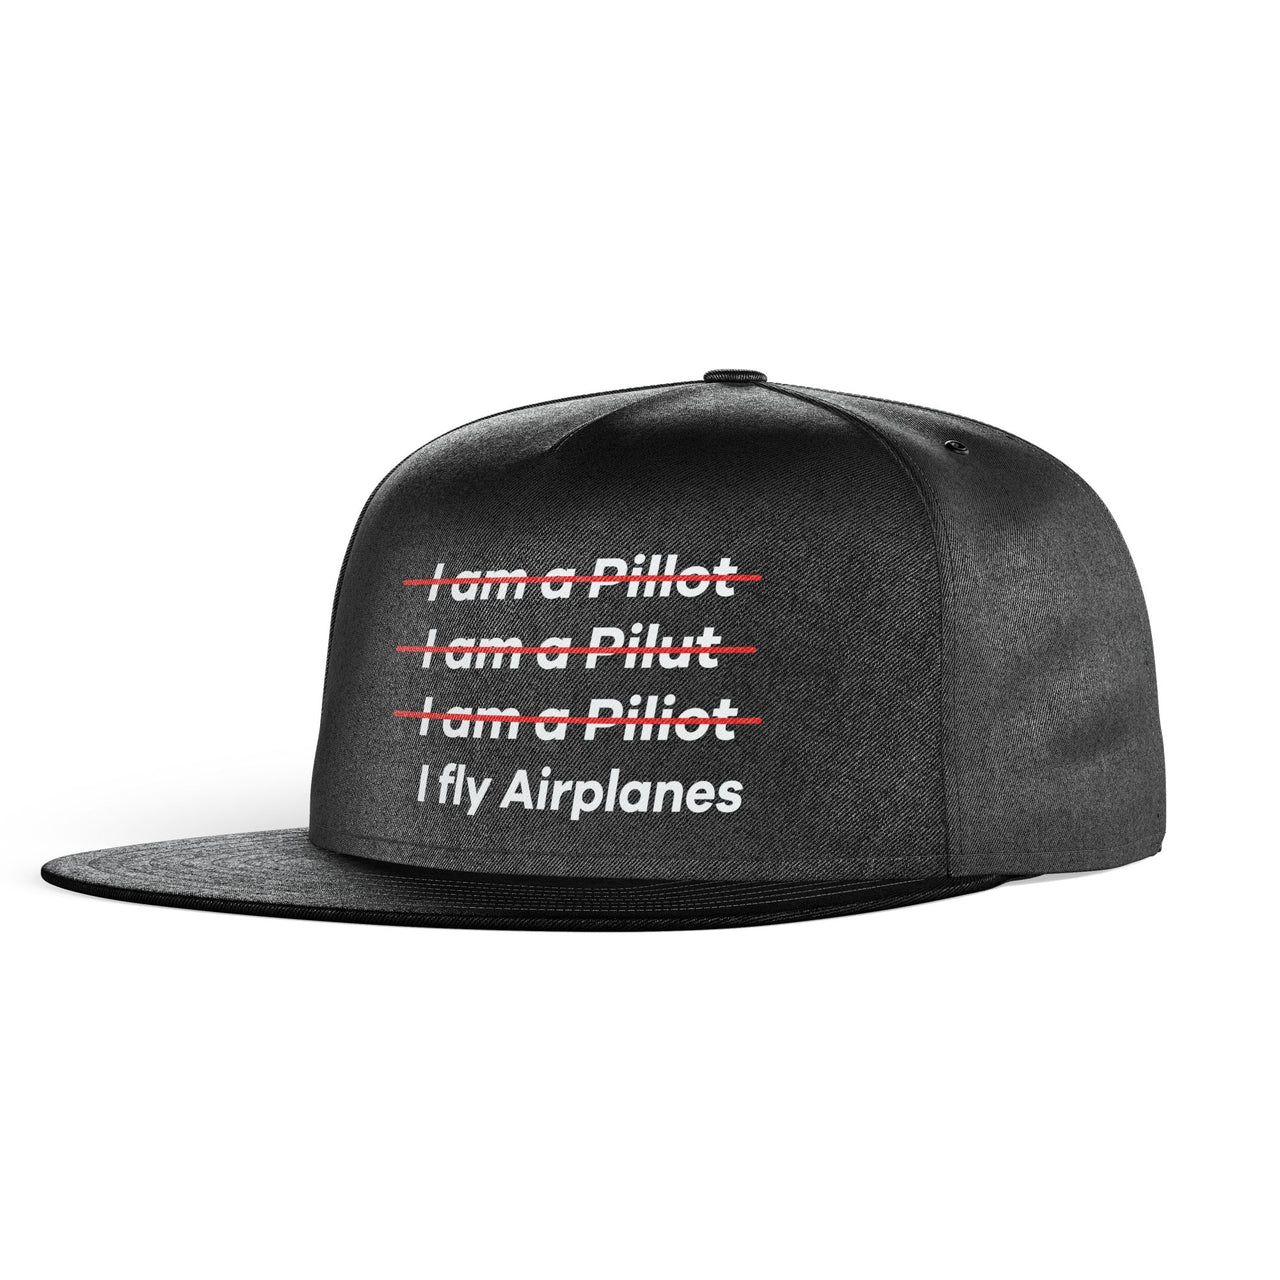 I Fly Airplanes Designed Snapback Caps & Hats